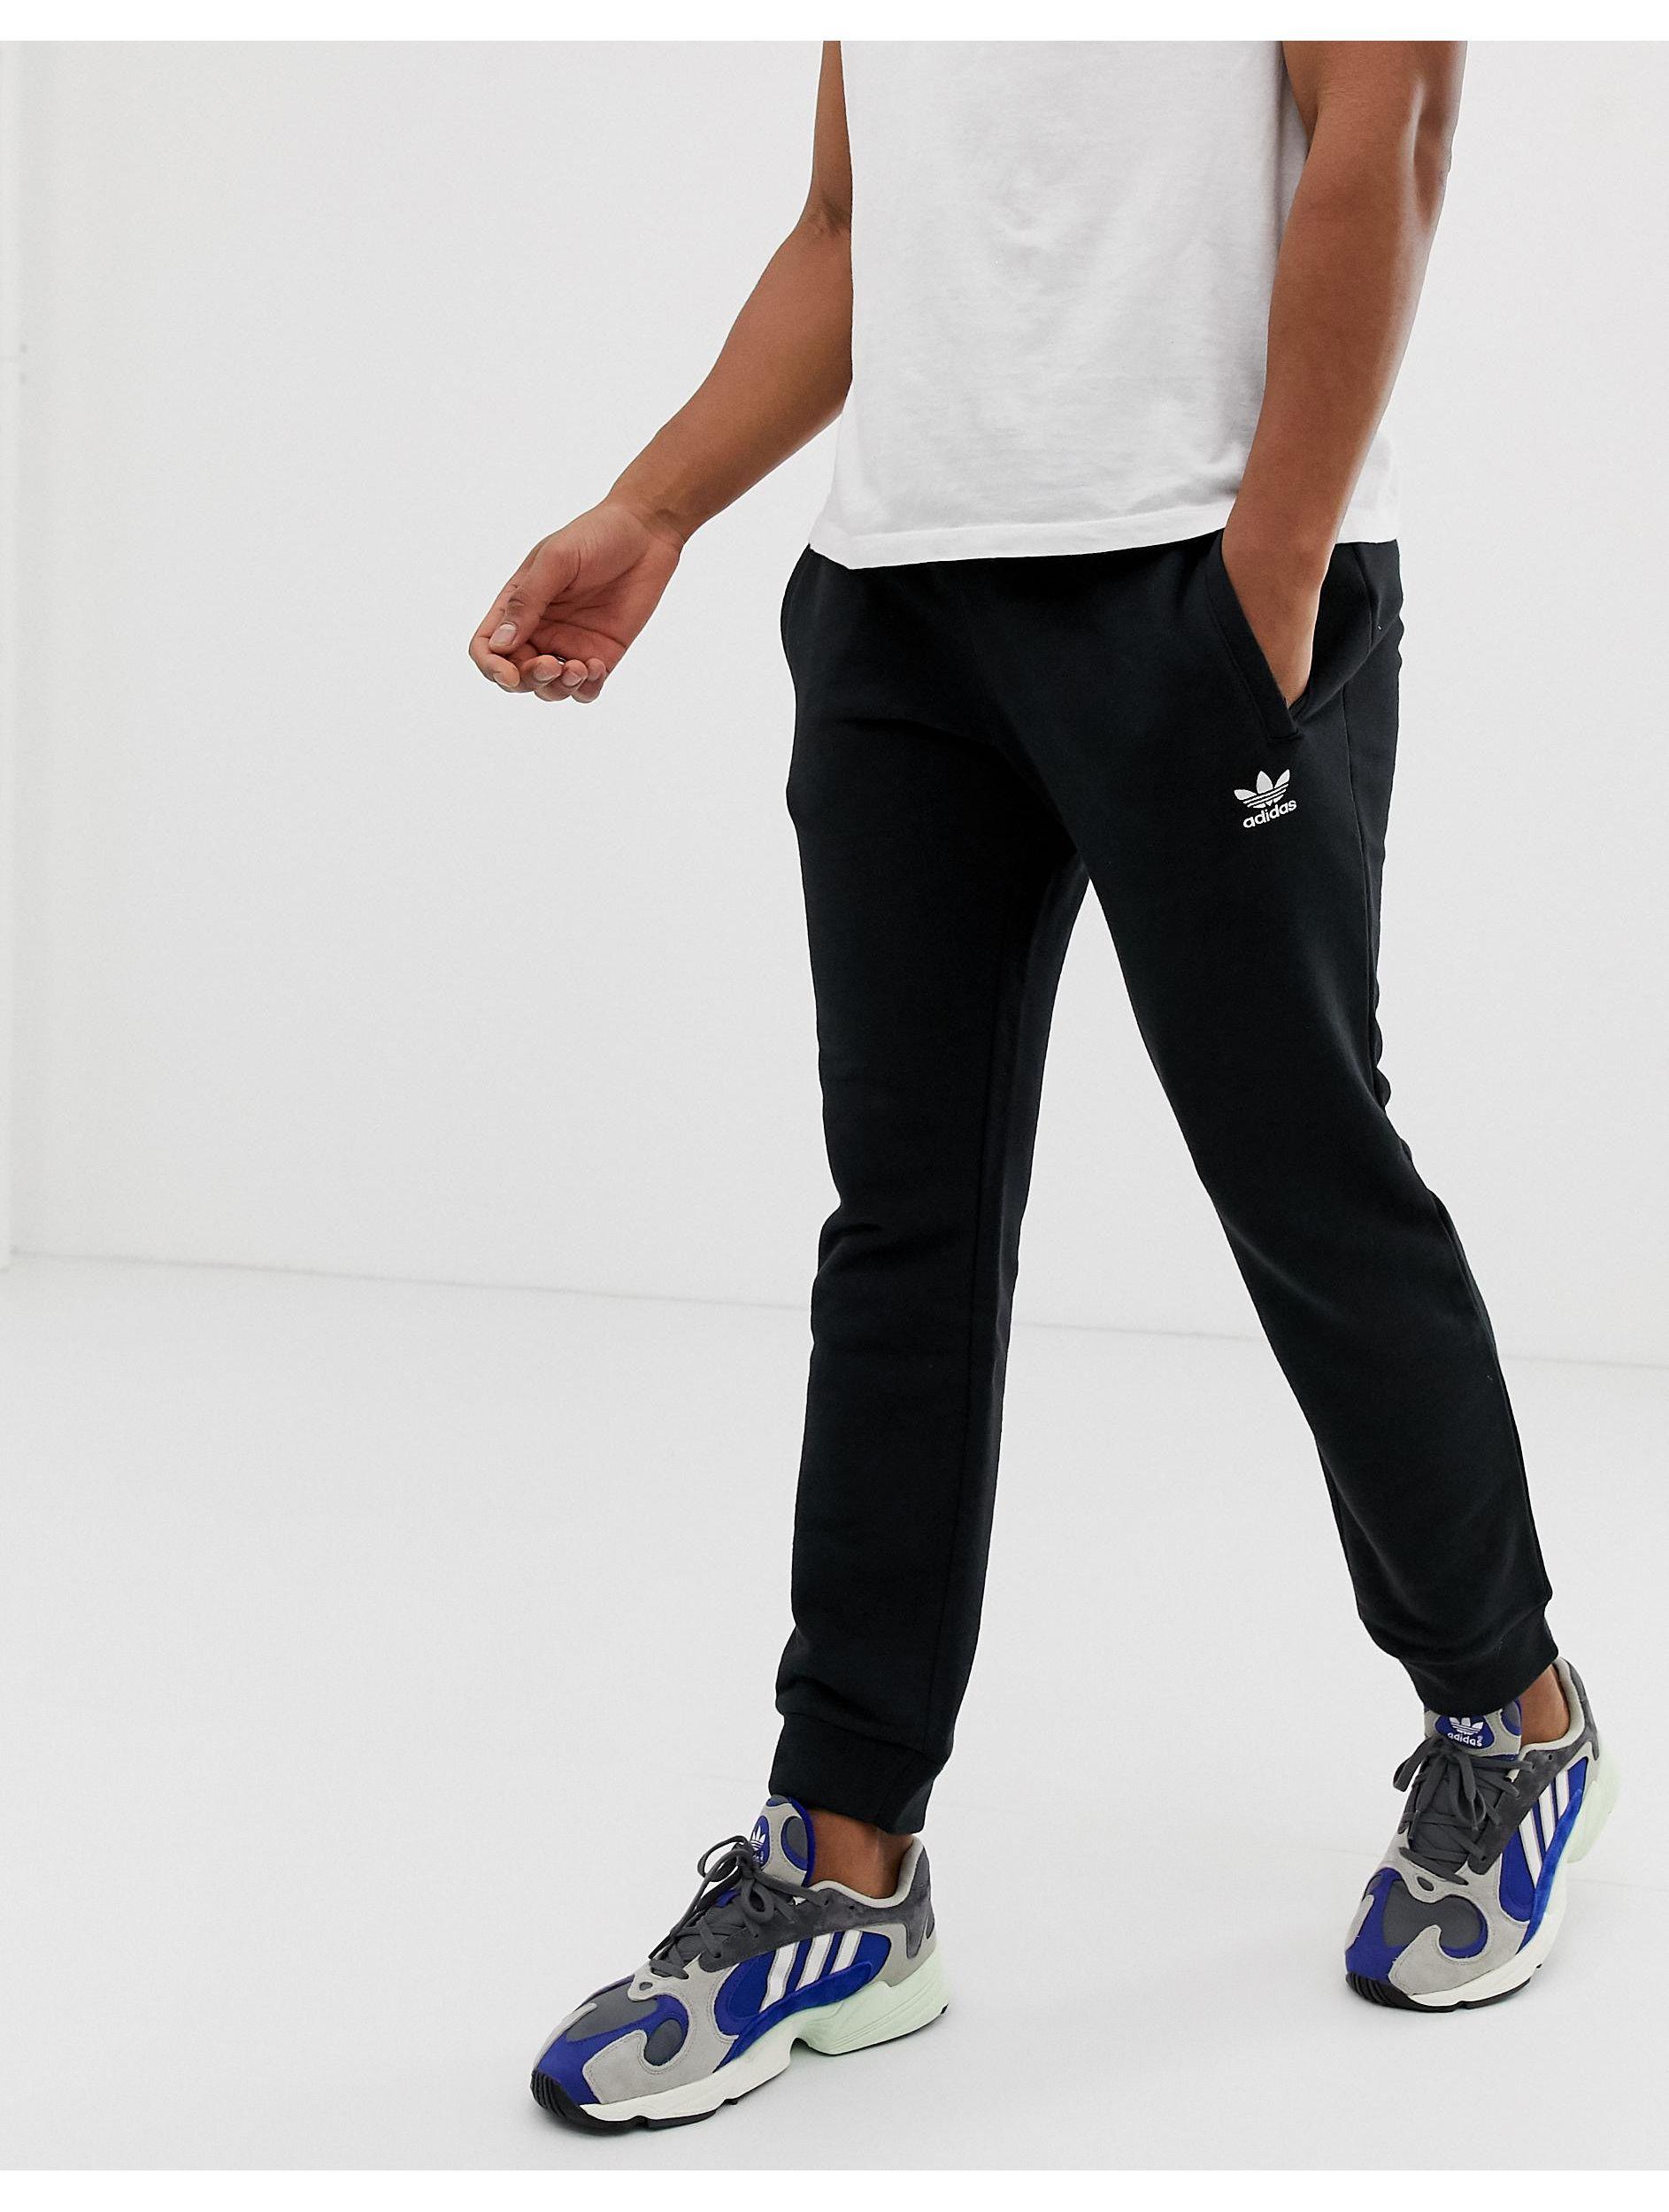 Adidas Originals Joggers With Logo Embroidery Black Hotsell, 58 